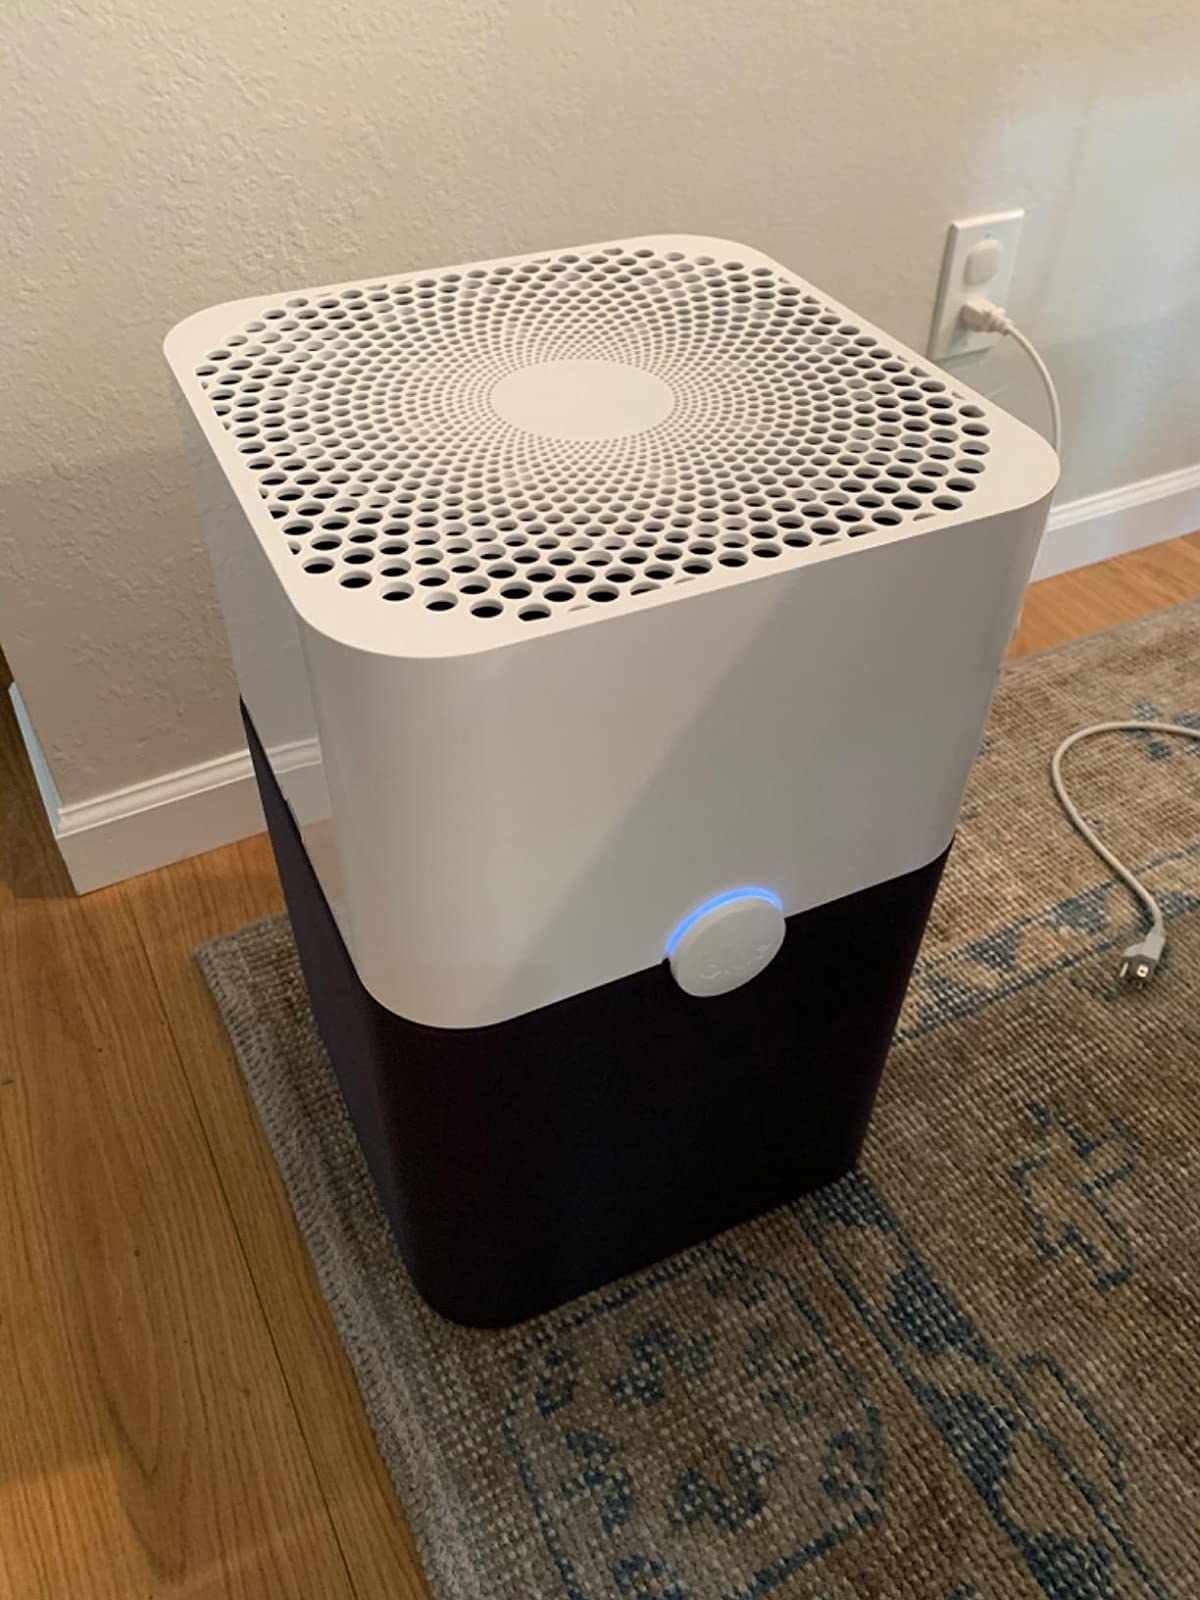 reviewer image of the air purifier on a rug